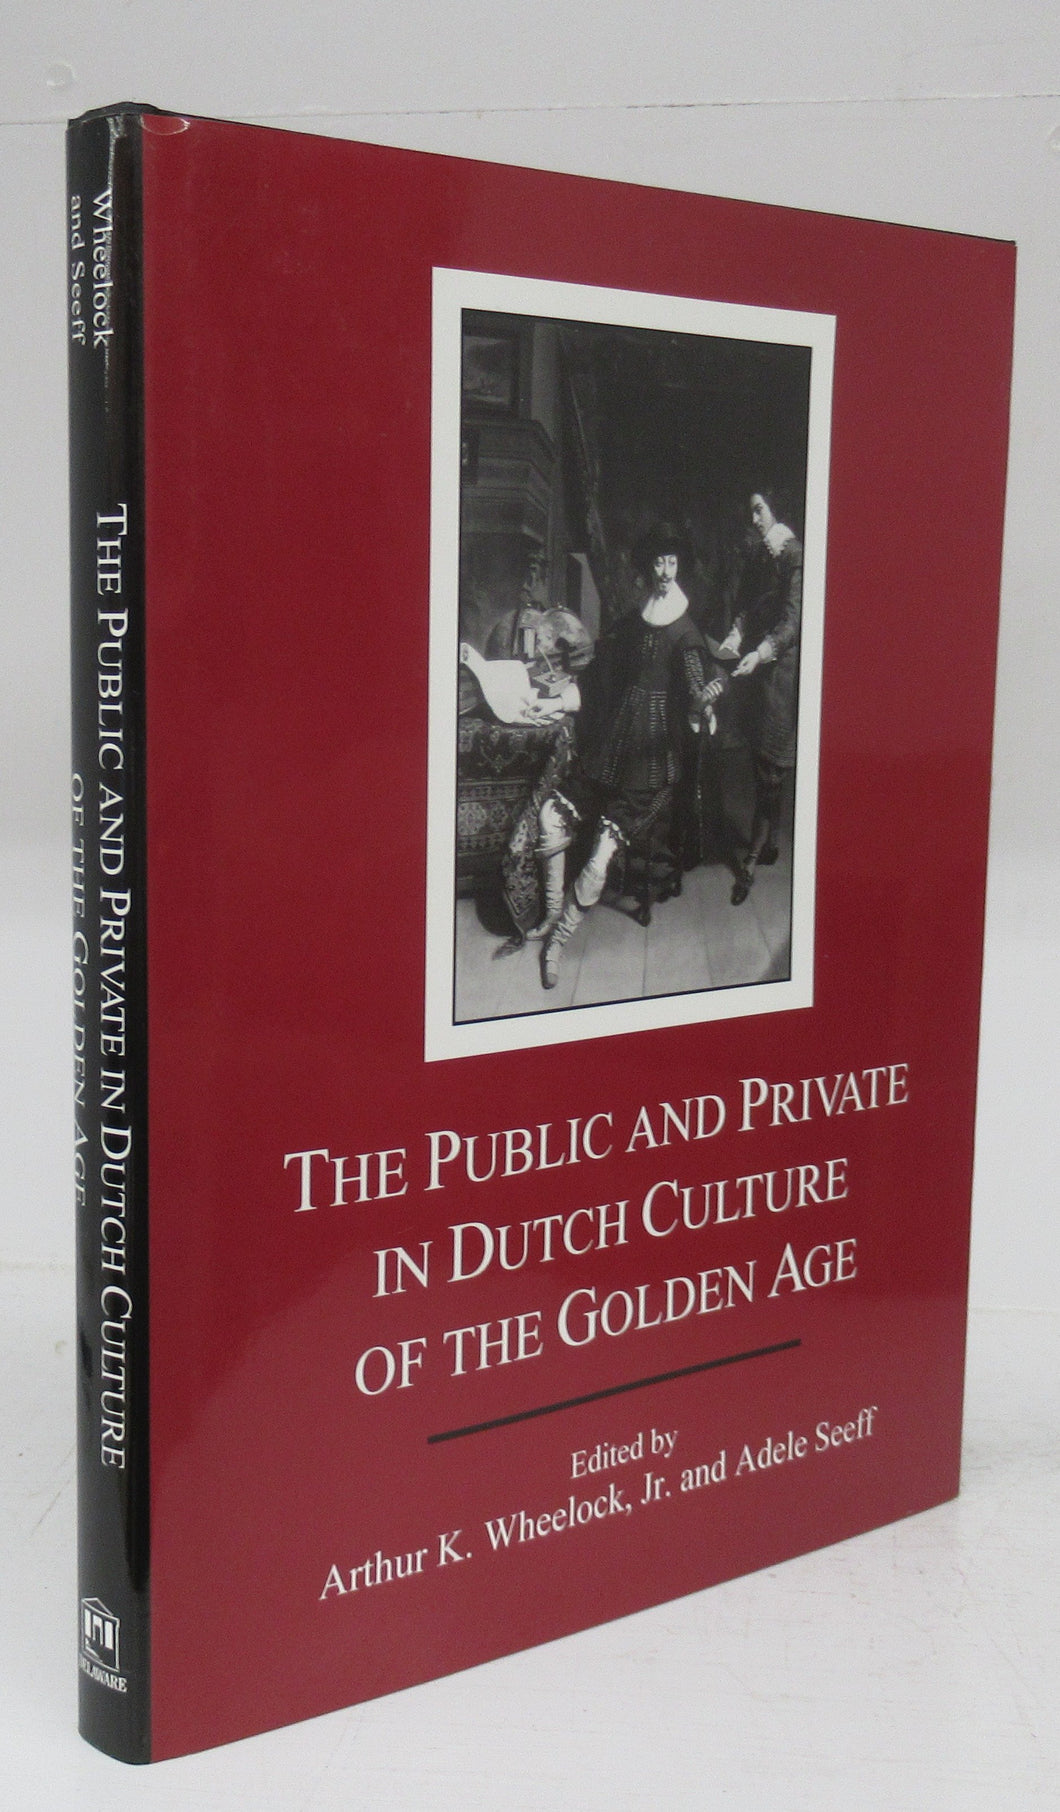 The Public and Private in Dutch Culture of the Golden Age